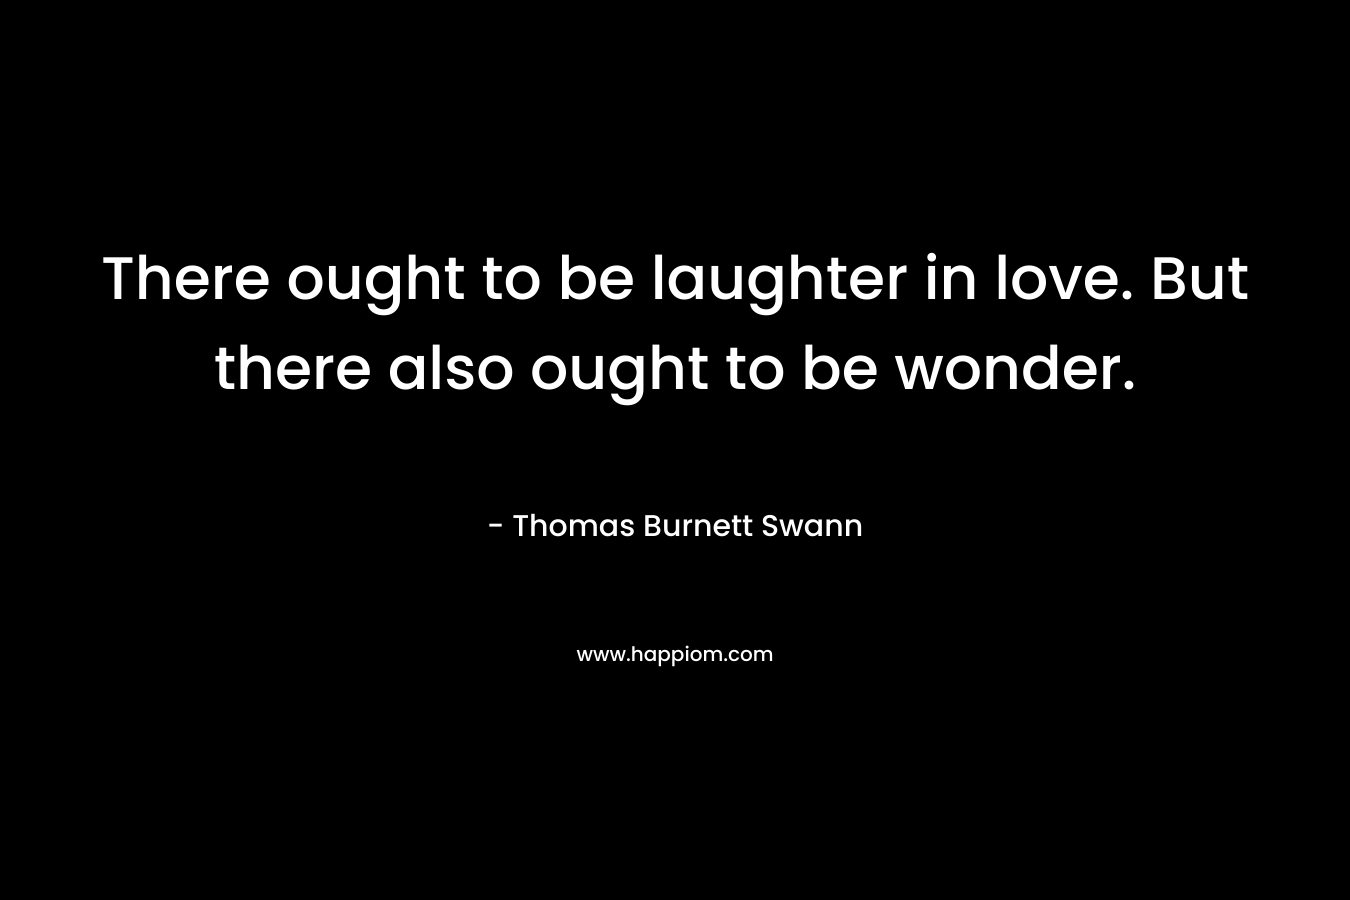 There ought to be laughter in love. But there also ought to be wonder.